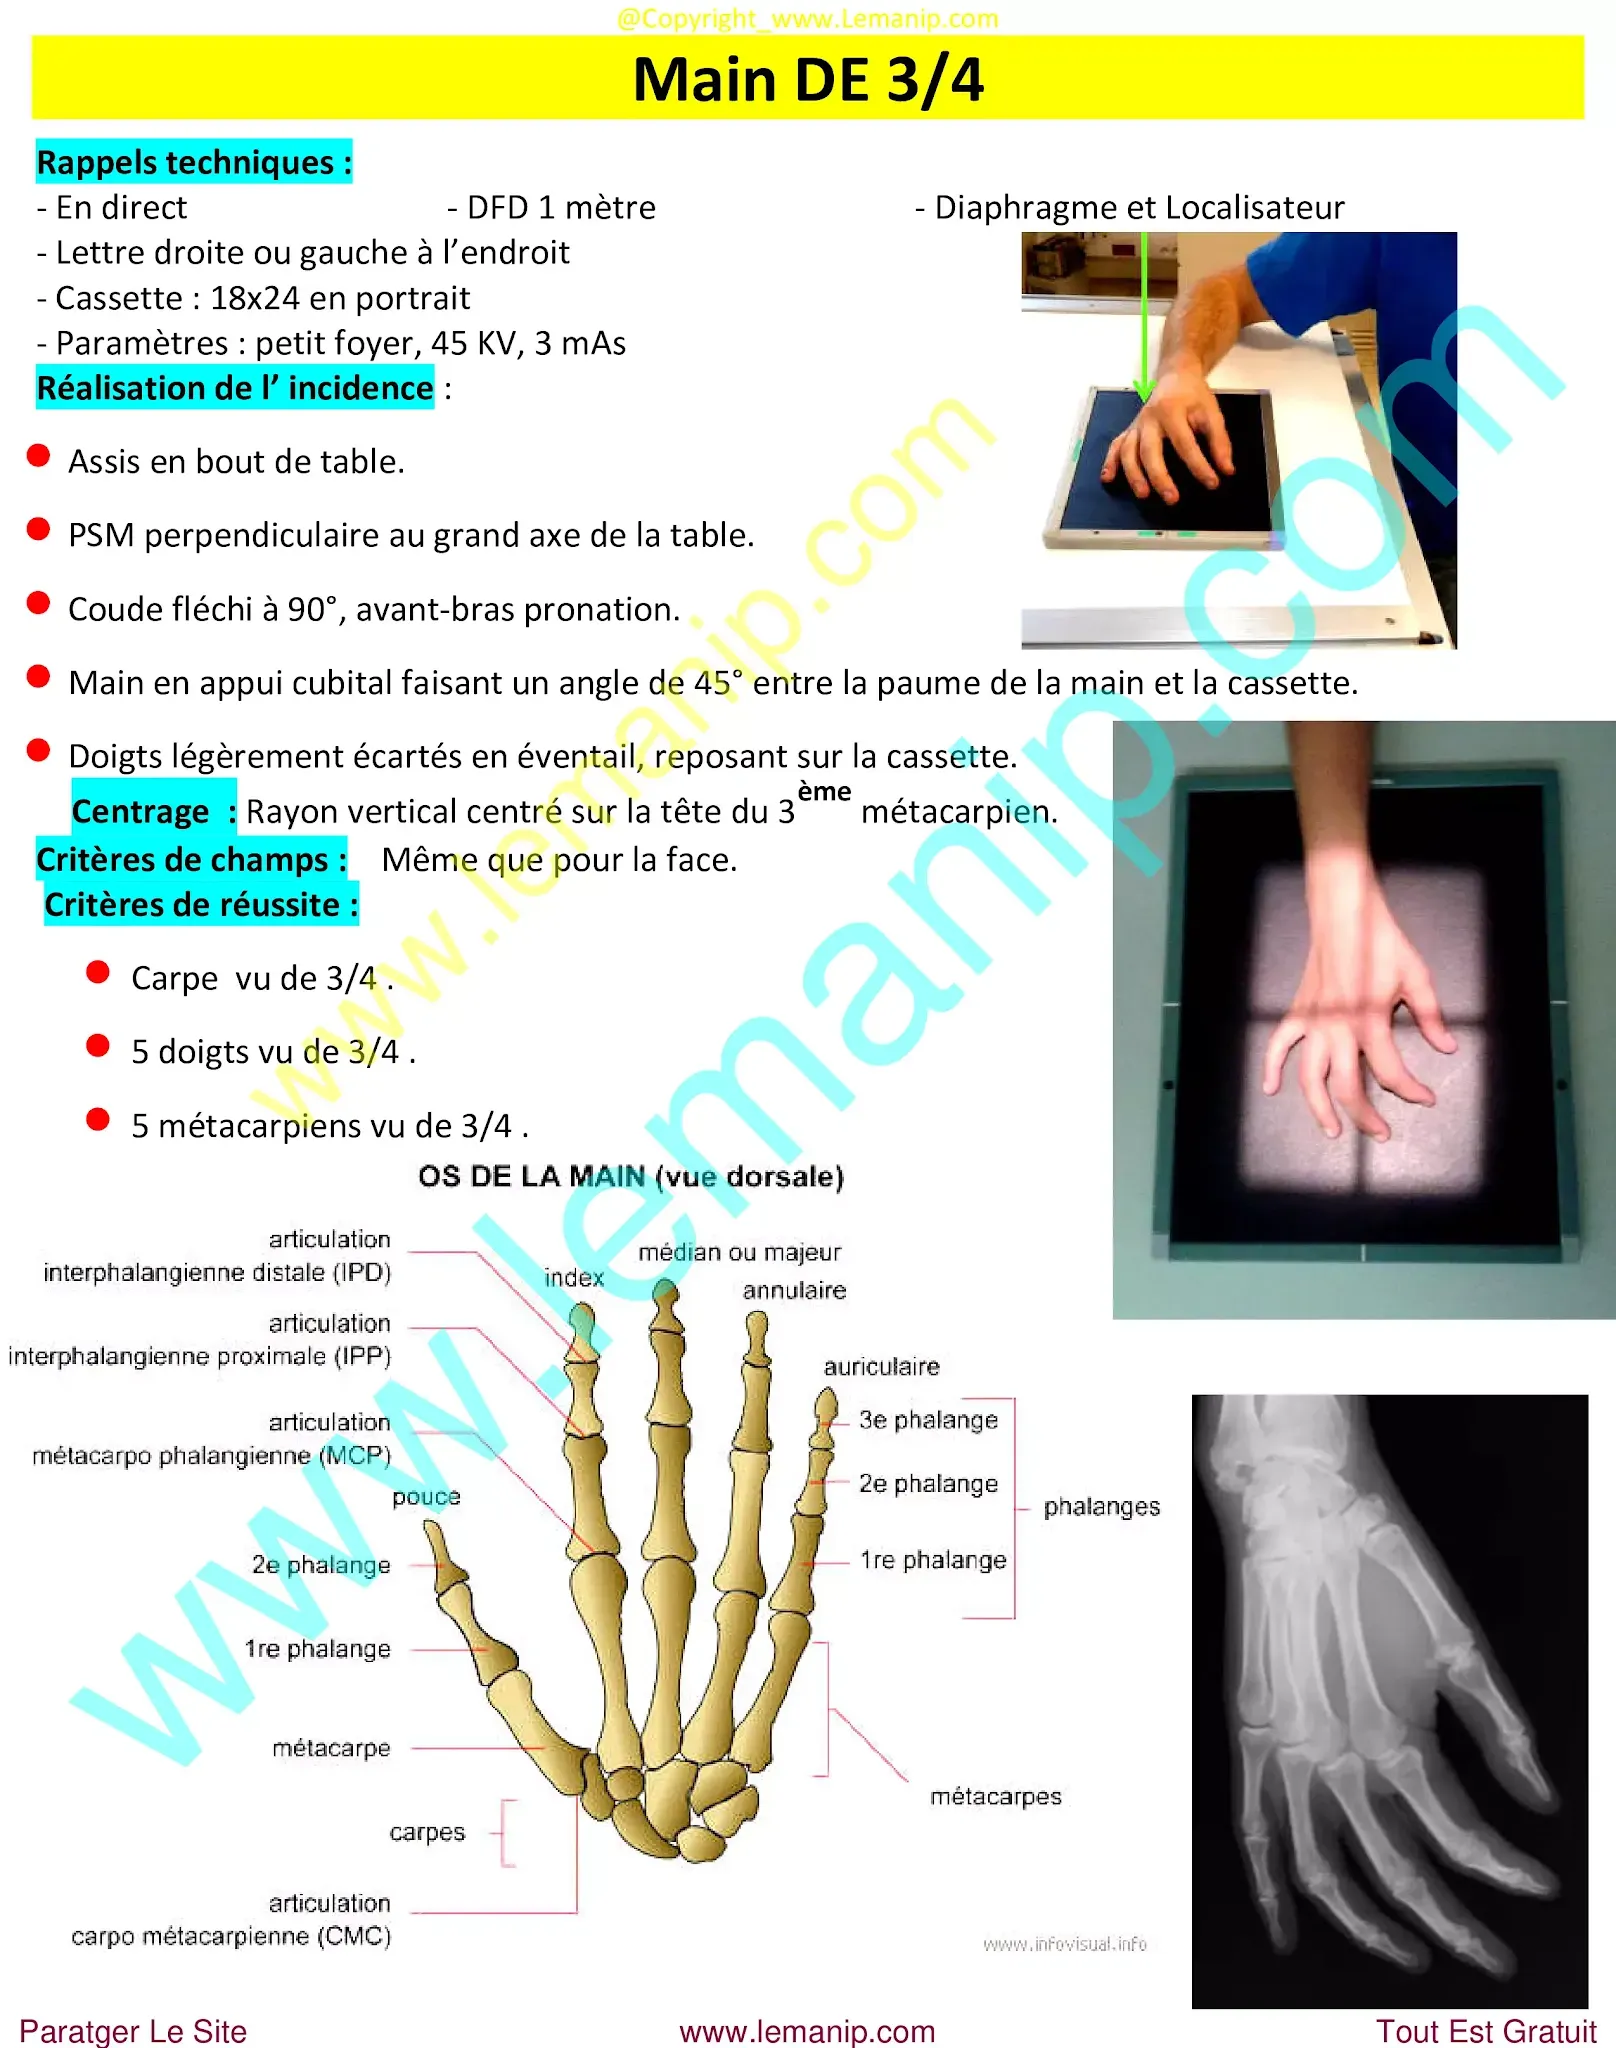 avant bras,elbow pain orthopedic doctor,dr henry hand and wrist,elbow pain treatment near me,premier orthopedics hand specialist,bras avant,hand man,orthopedic hand,orthopedic wrist,orthopedic elbow,orthopedic carpal tunnel